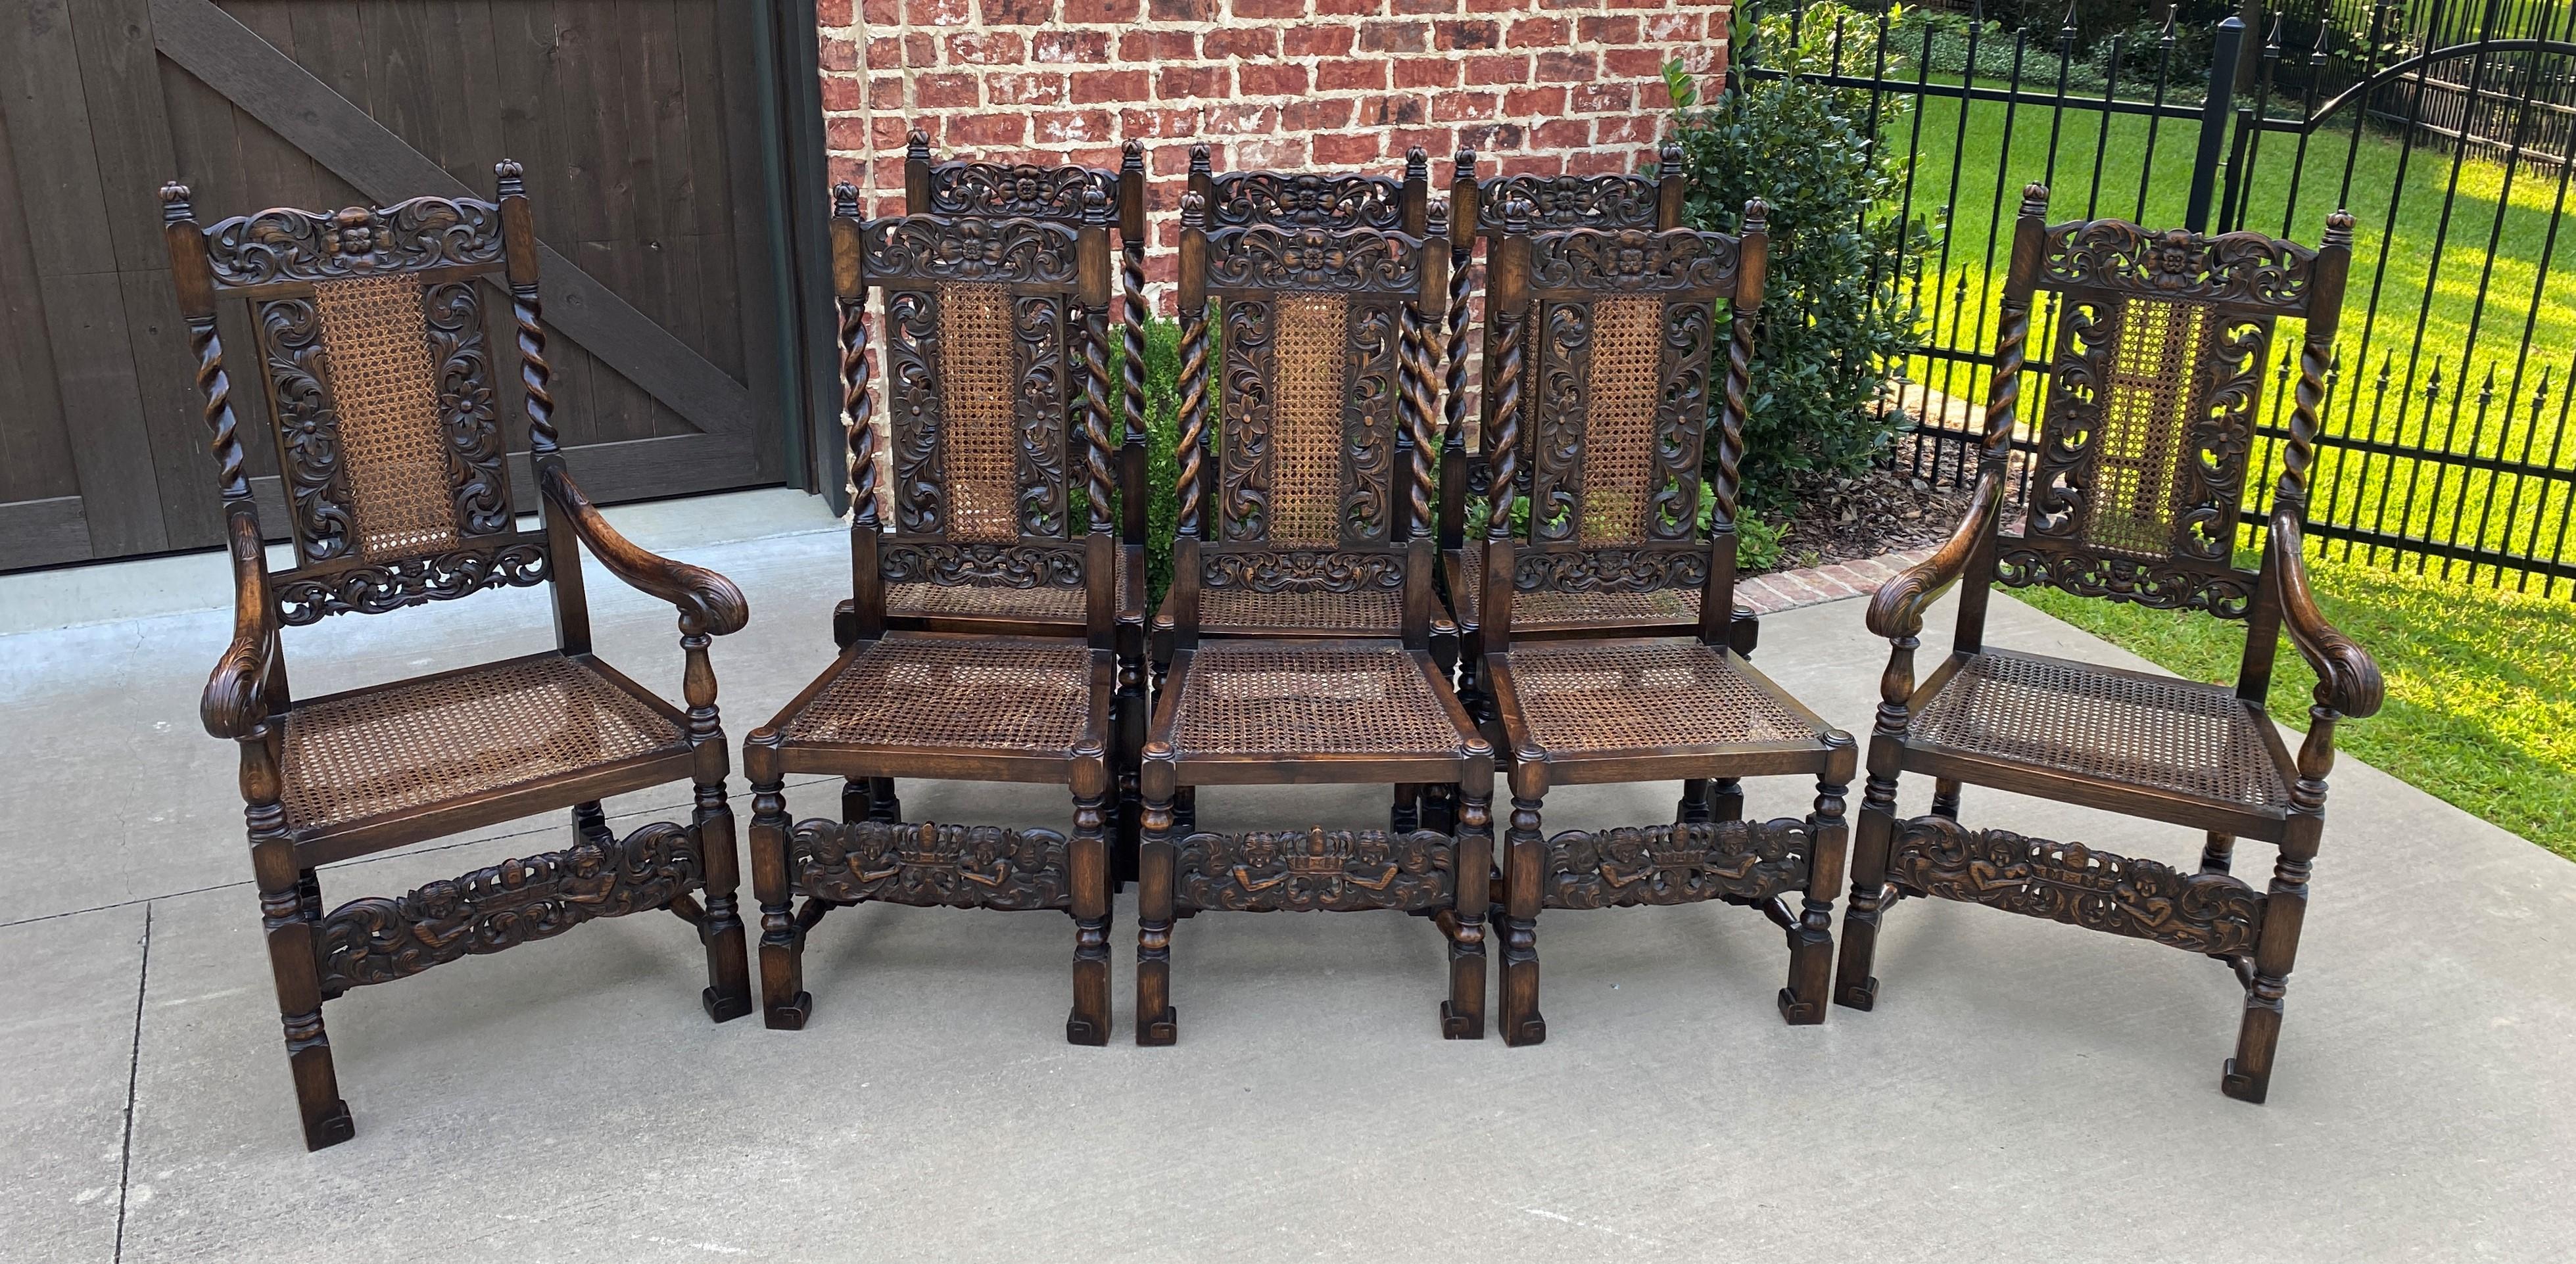 Early 20th Century Antique English Chairs Set of 8 Barley Twist Caned Oak Dining Chairs Seating